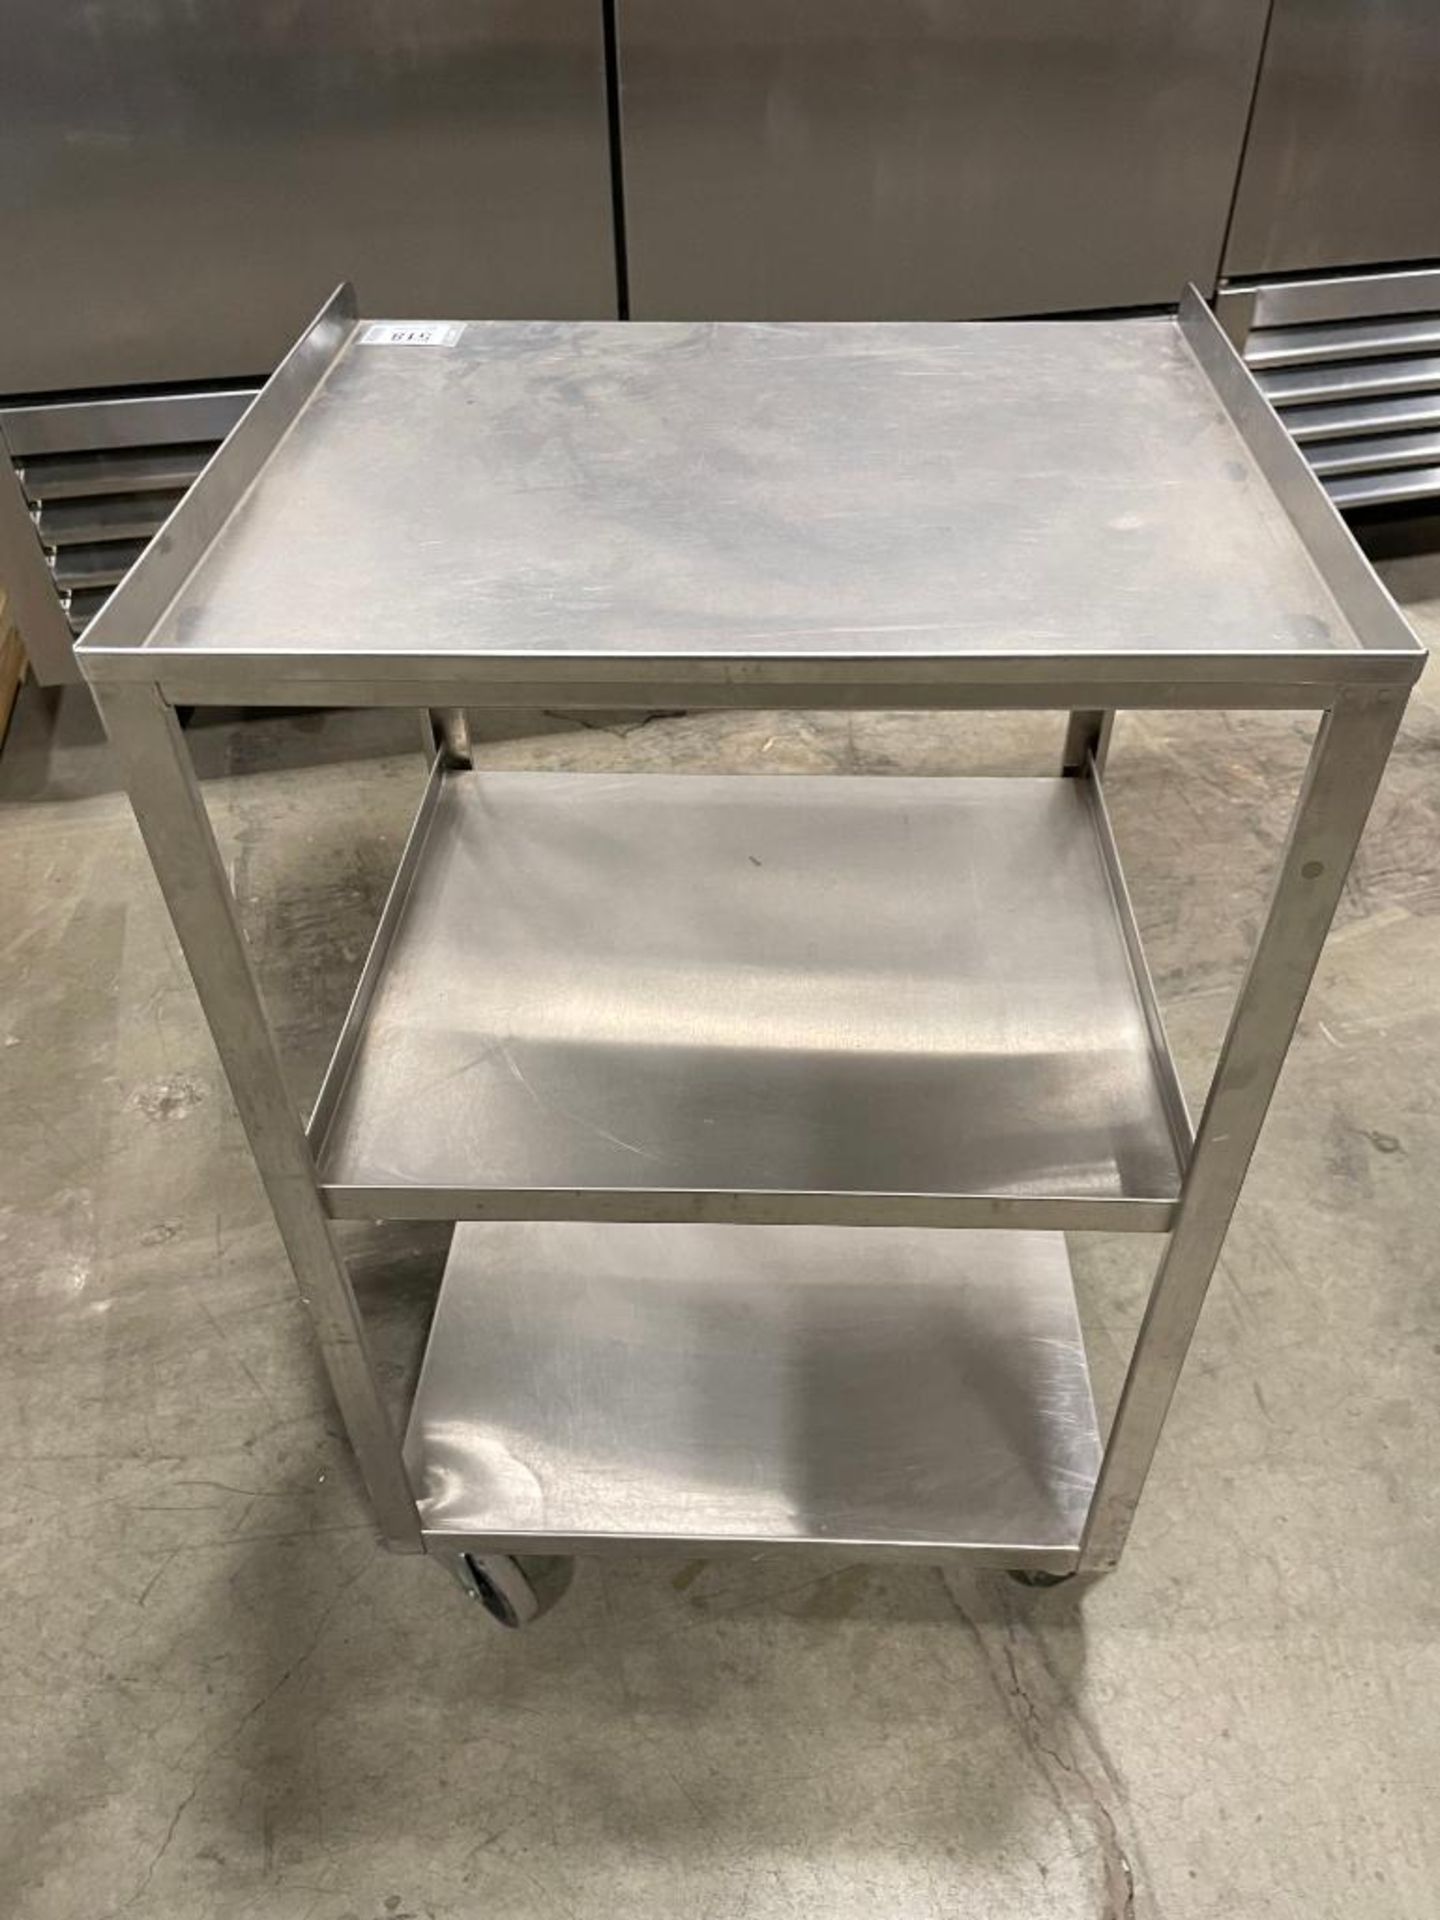 3 TIER STAINLESS STEEL UTILITY CART - Image 4 of 4